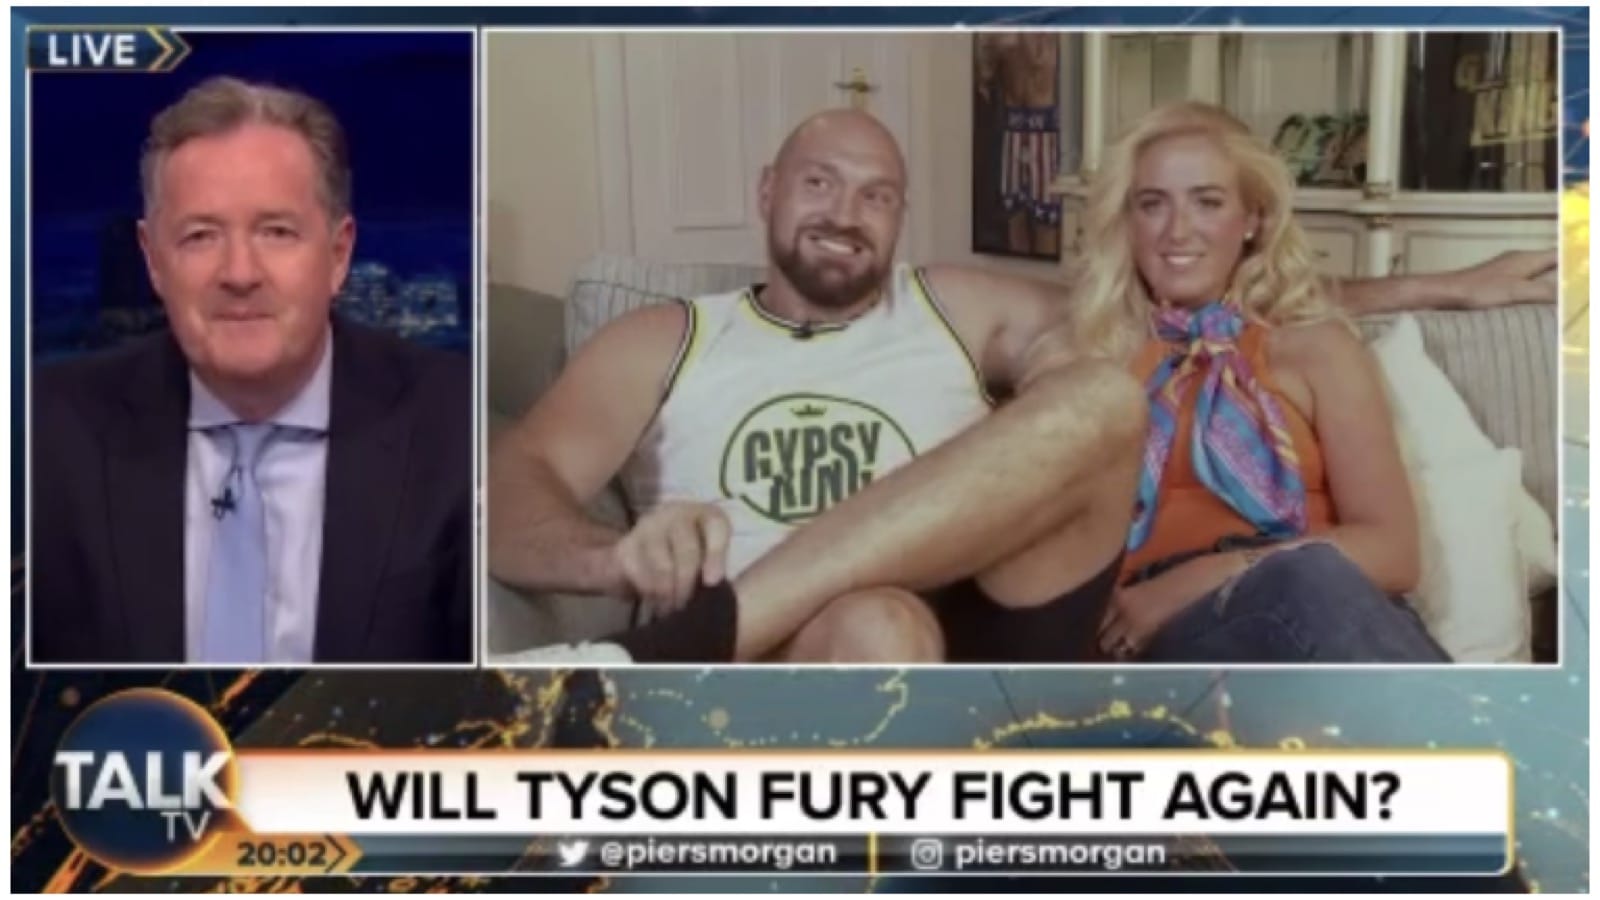 Tyson Fury Says He Will Give Piers Morgan A Million Pounds If He Fights Again!